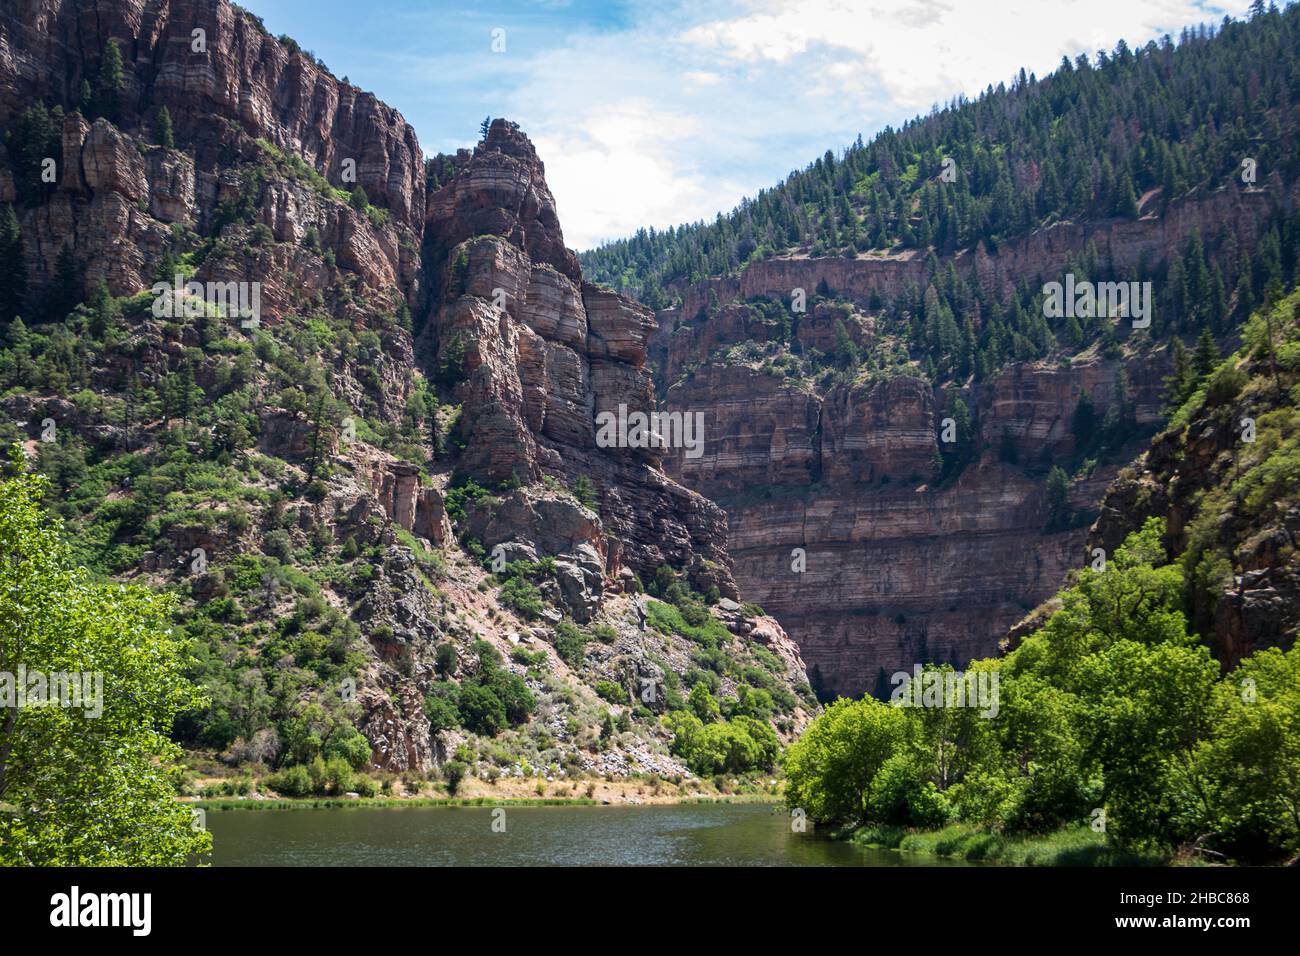 Scenic view of rock stratum in Glenwood Canyon with the Colorado River  below, on a sunny summer day. Glenwood Springs, Colorado, USA Stock Photo